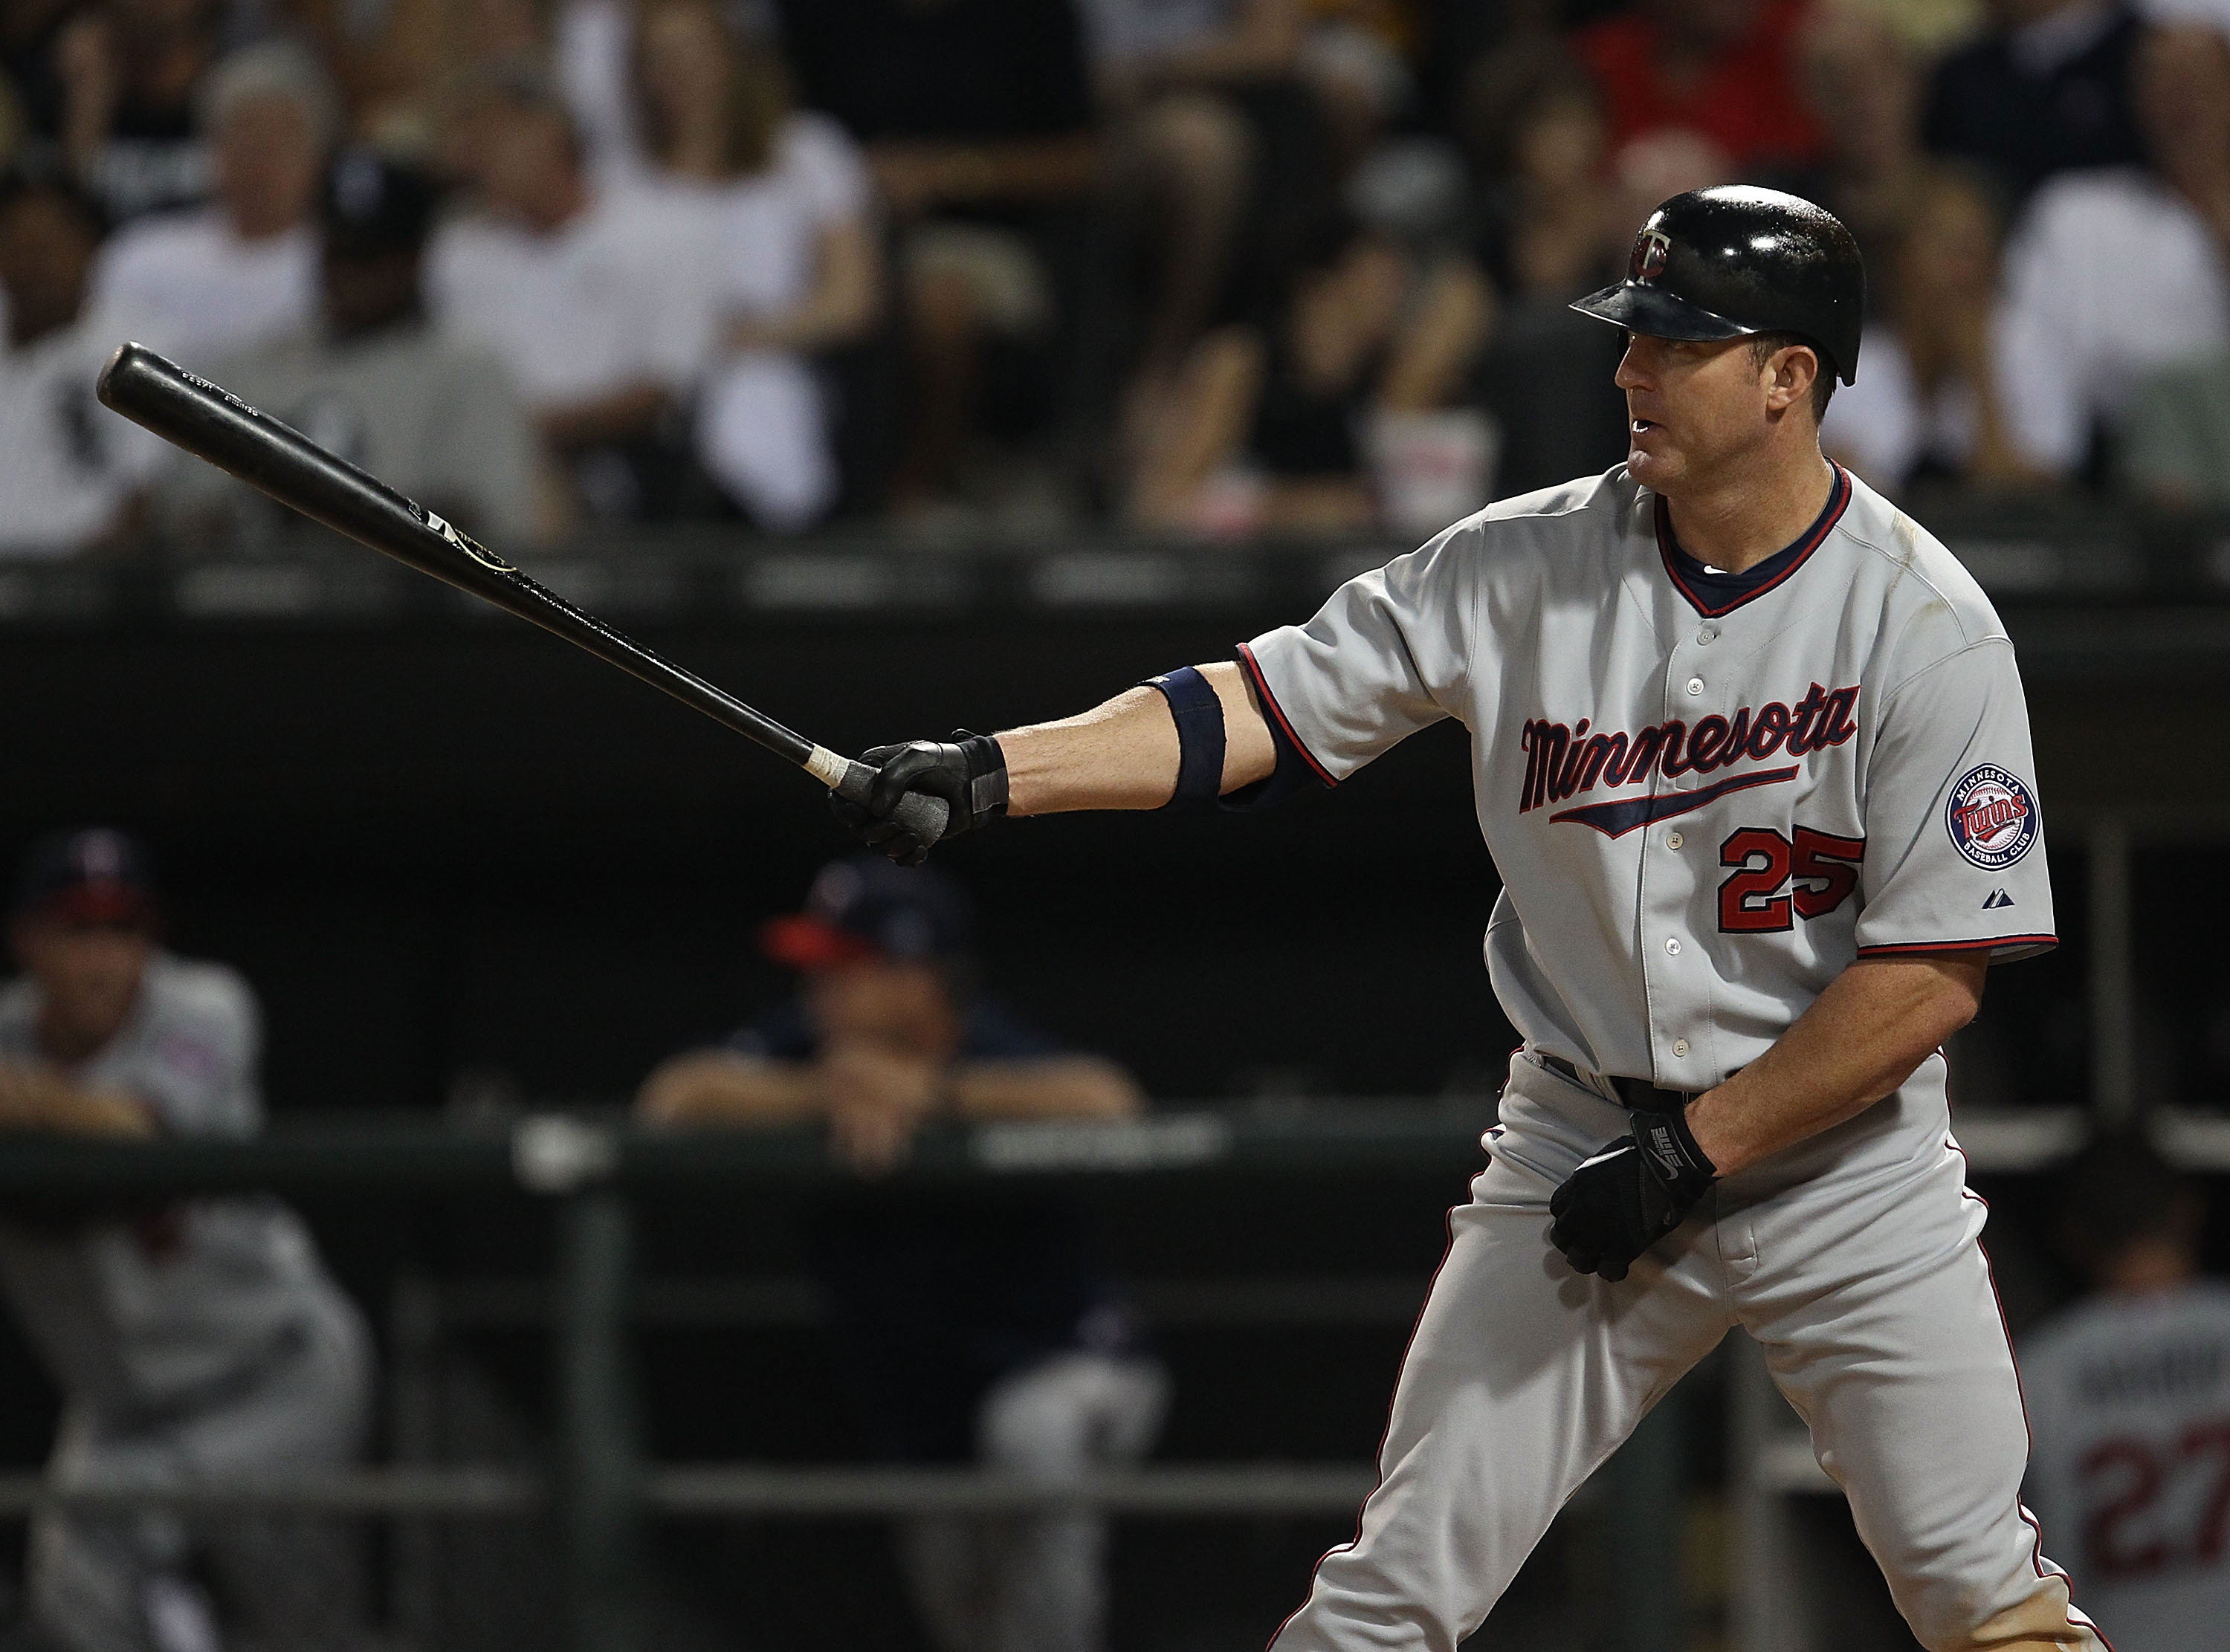 Jim Thome Was 1 of the Most Clutch Hitters Ever With the Records